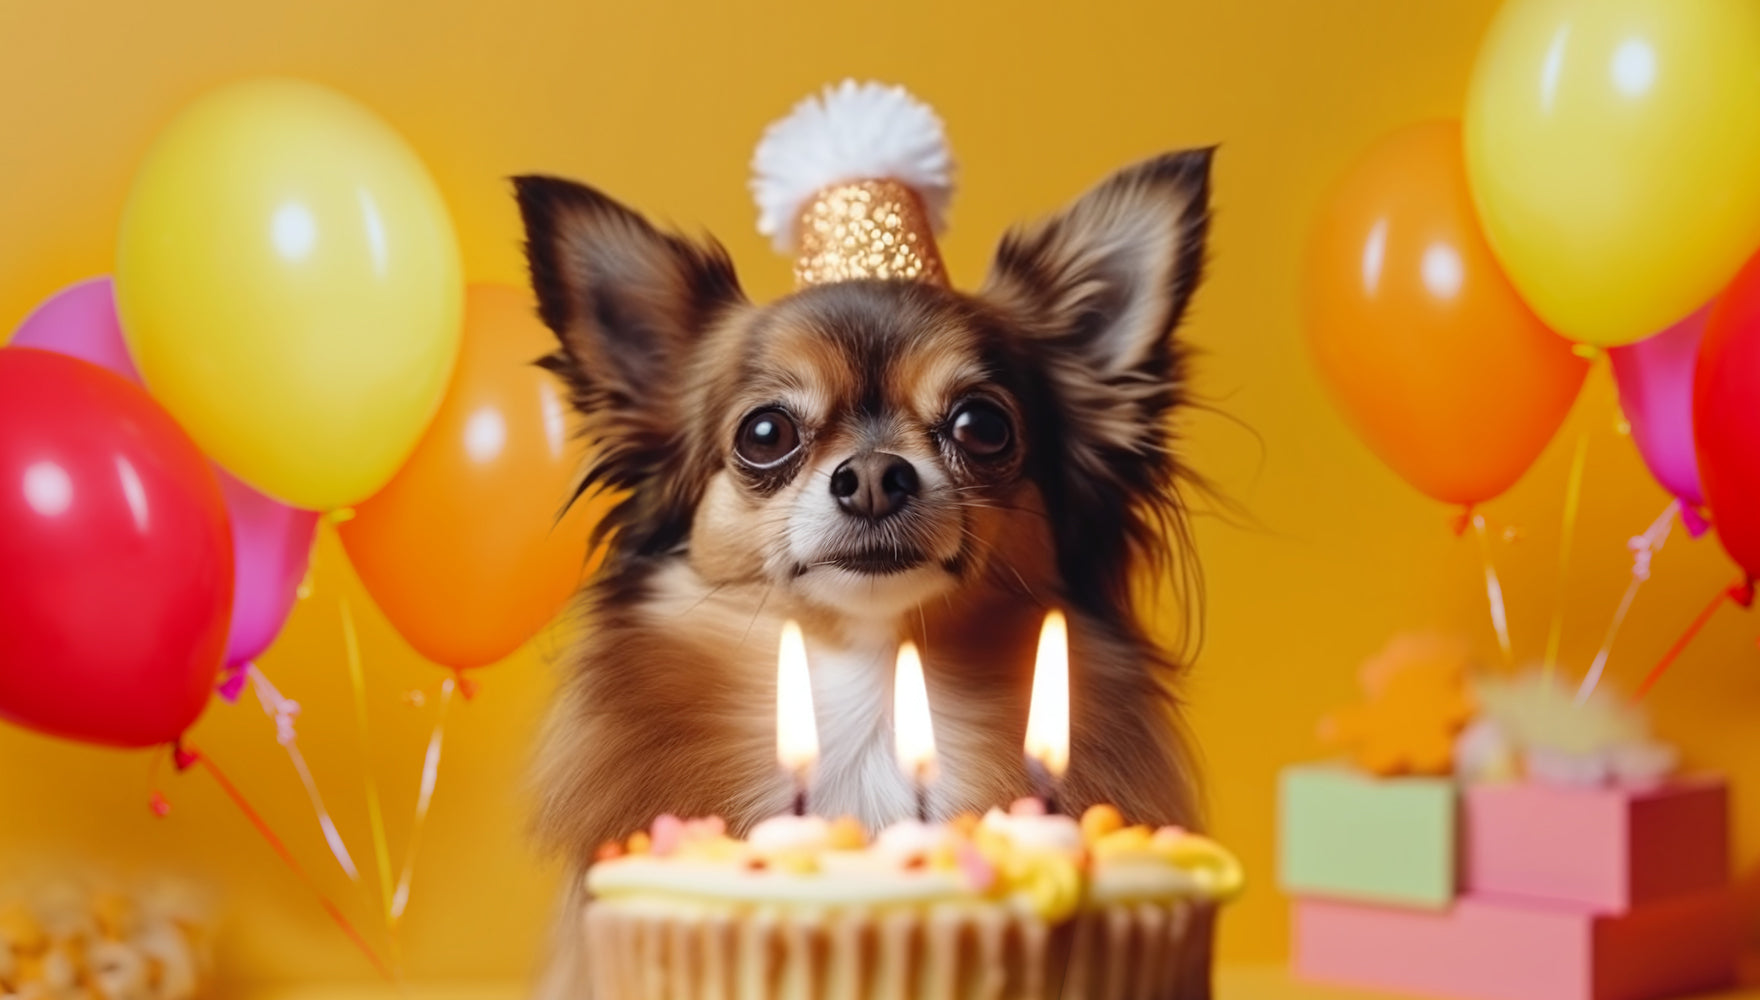 The important day you may not know! International Chihuahua Appreciation Day